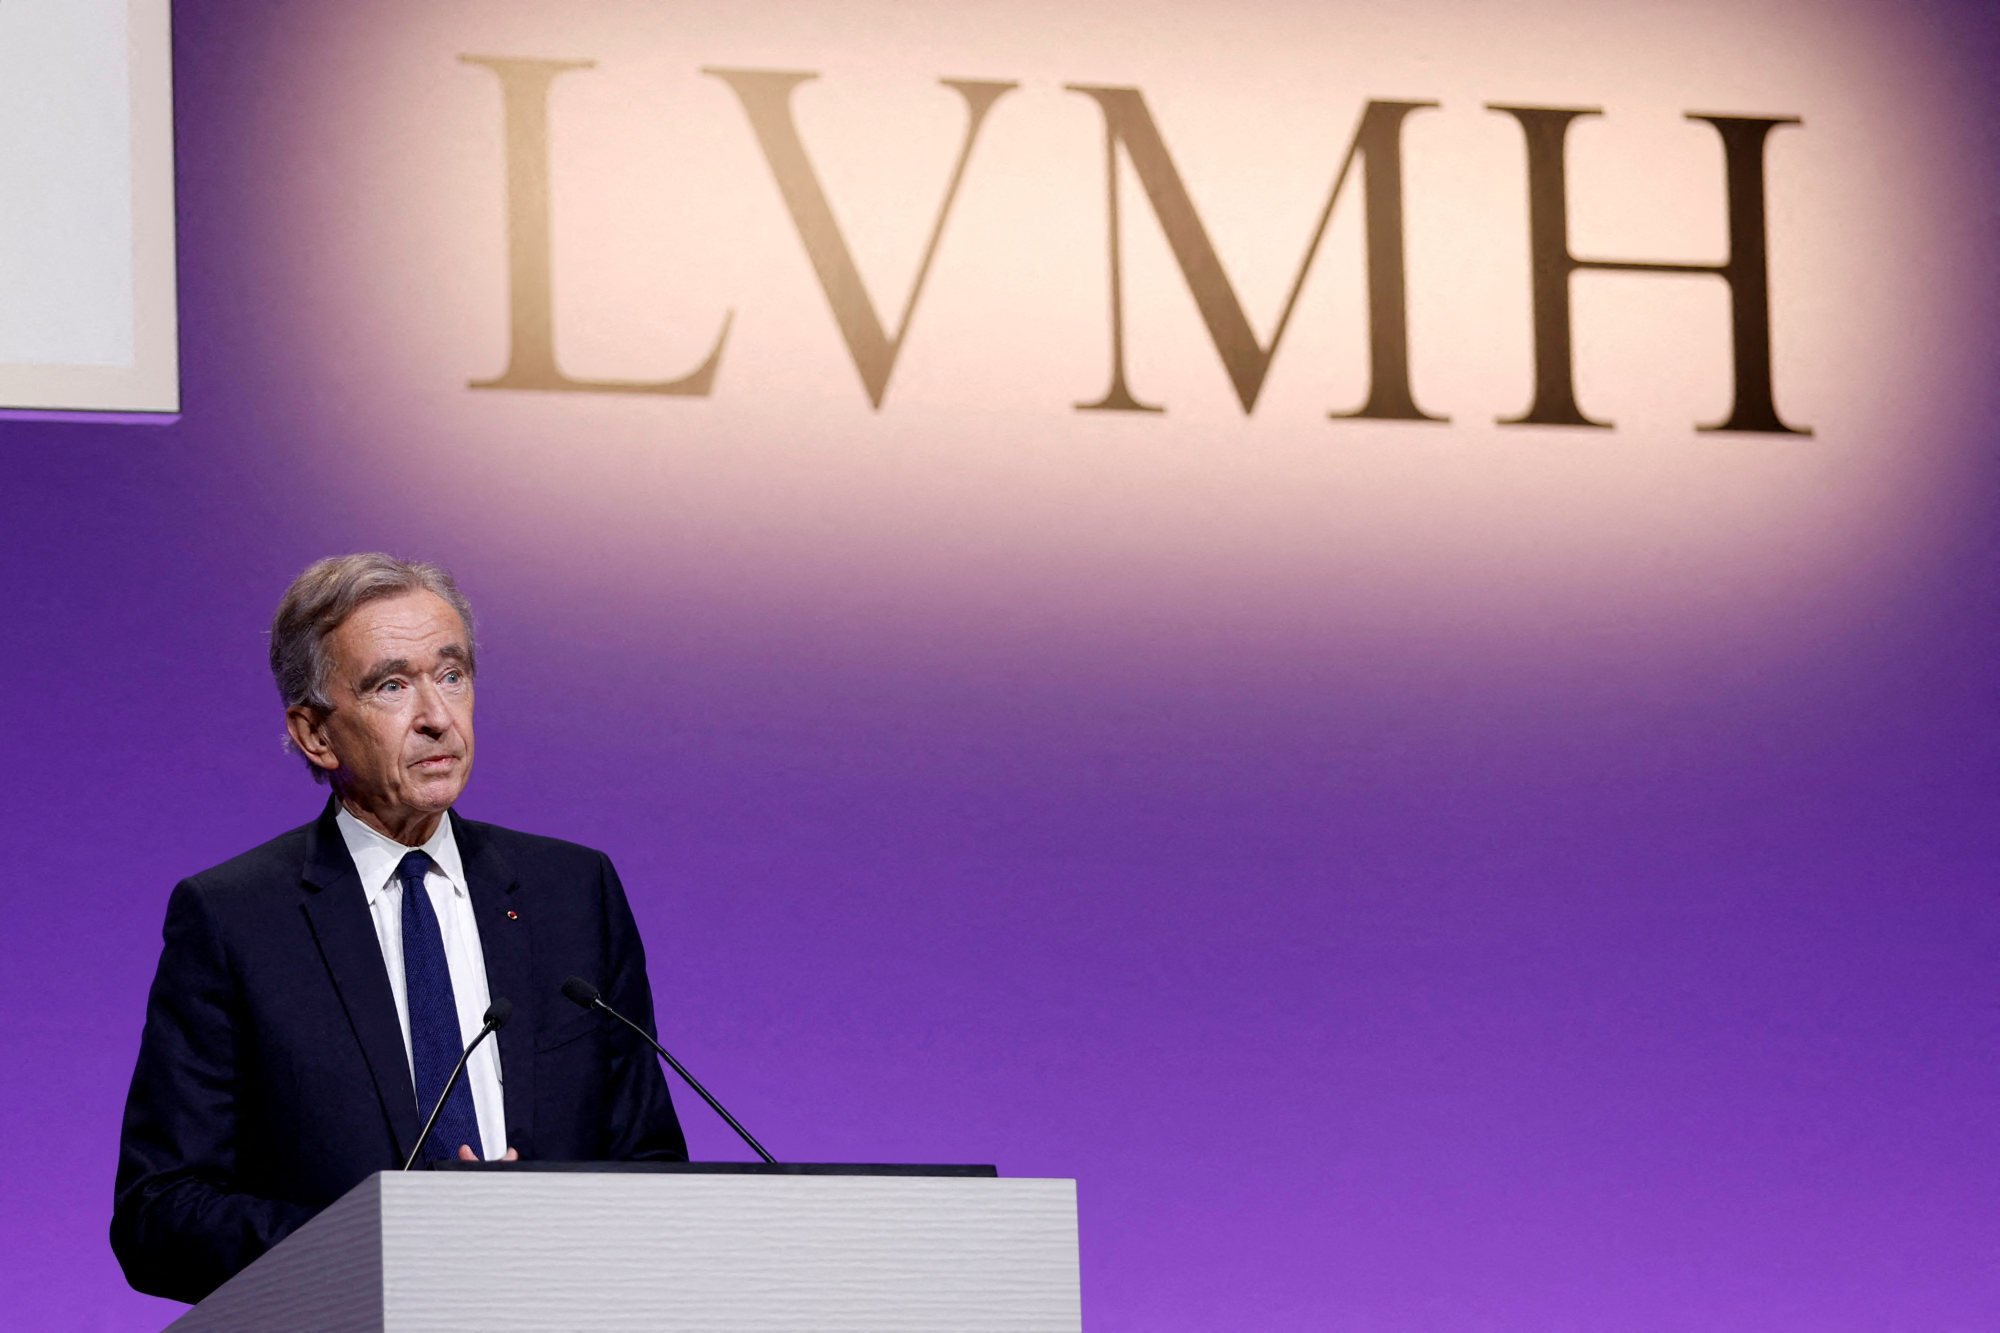 LVMH boss Bernard Arnault just reached new levels of wealth: after Elon  Musk and Jeff Bezos, he's now the third person in history worth over US$200  billion thanks to his luxury brand